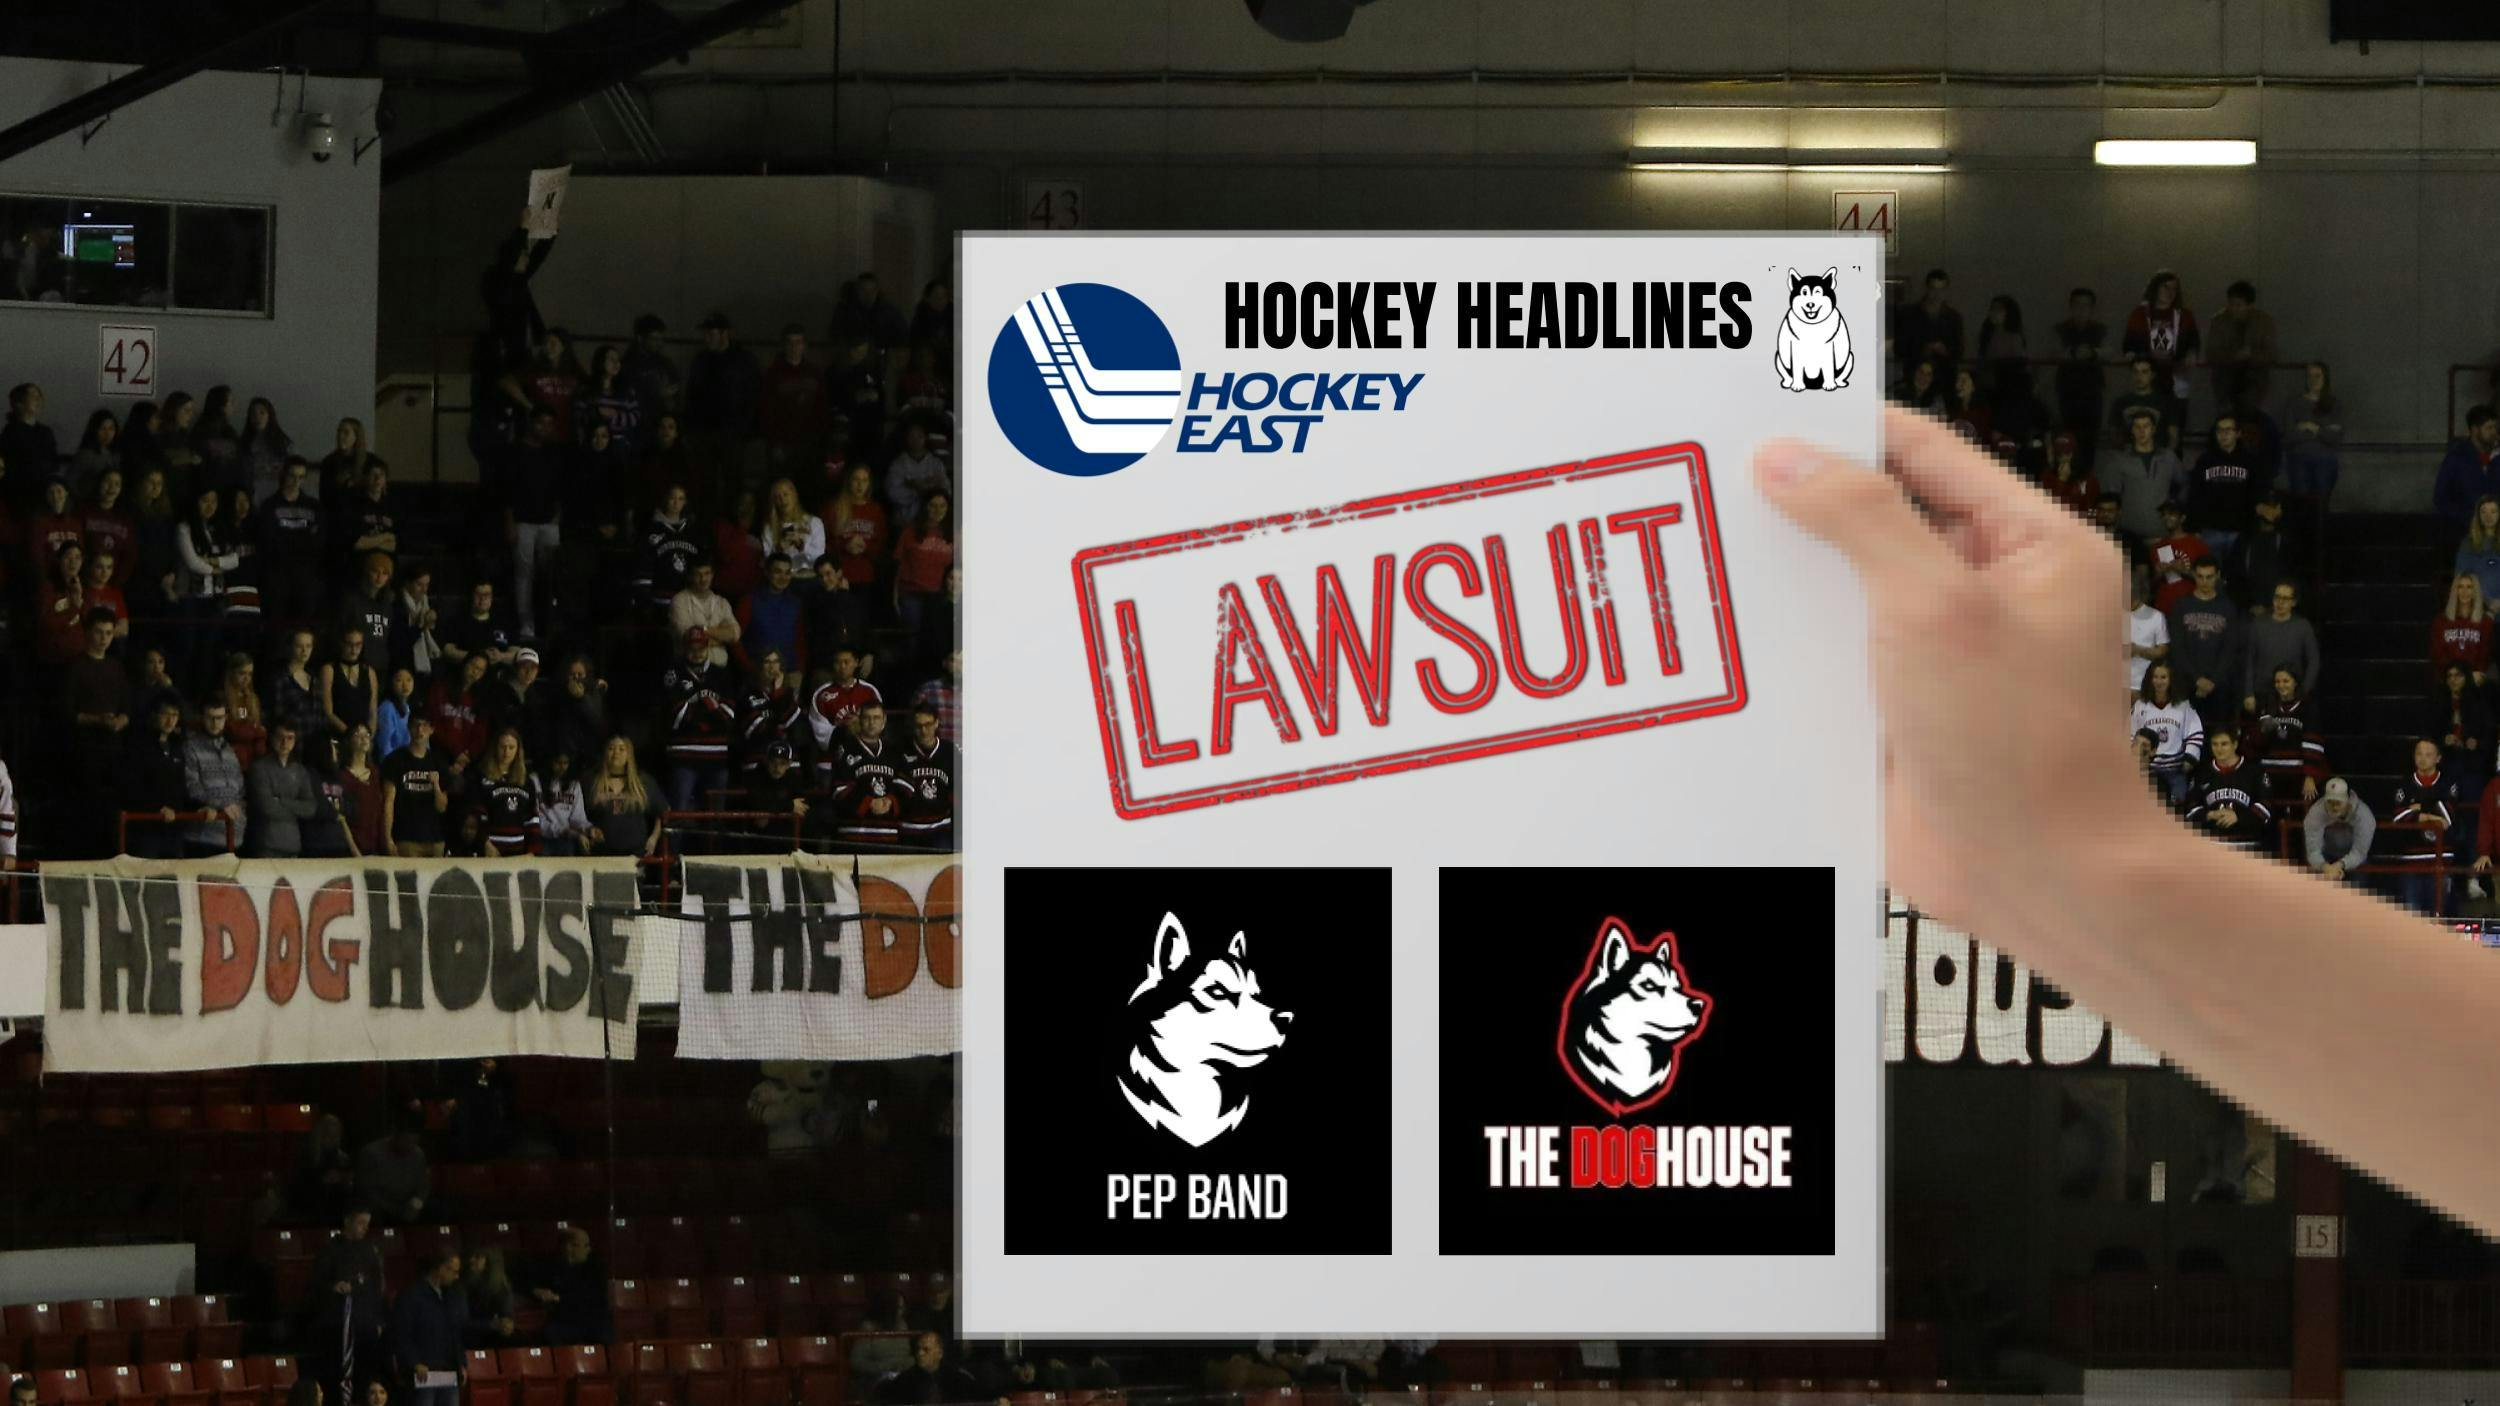 Thumbnail for 'DogHouse and Pep Band Sued for Emotional Damages by Hockey East: “They’re Just Too Mean”'